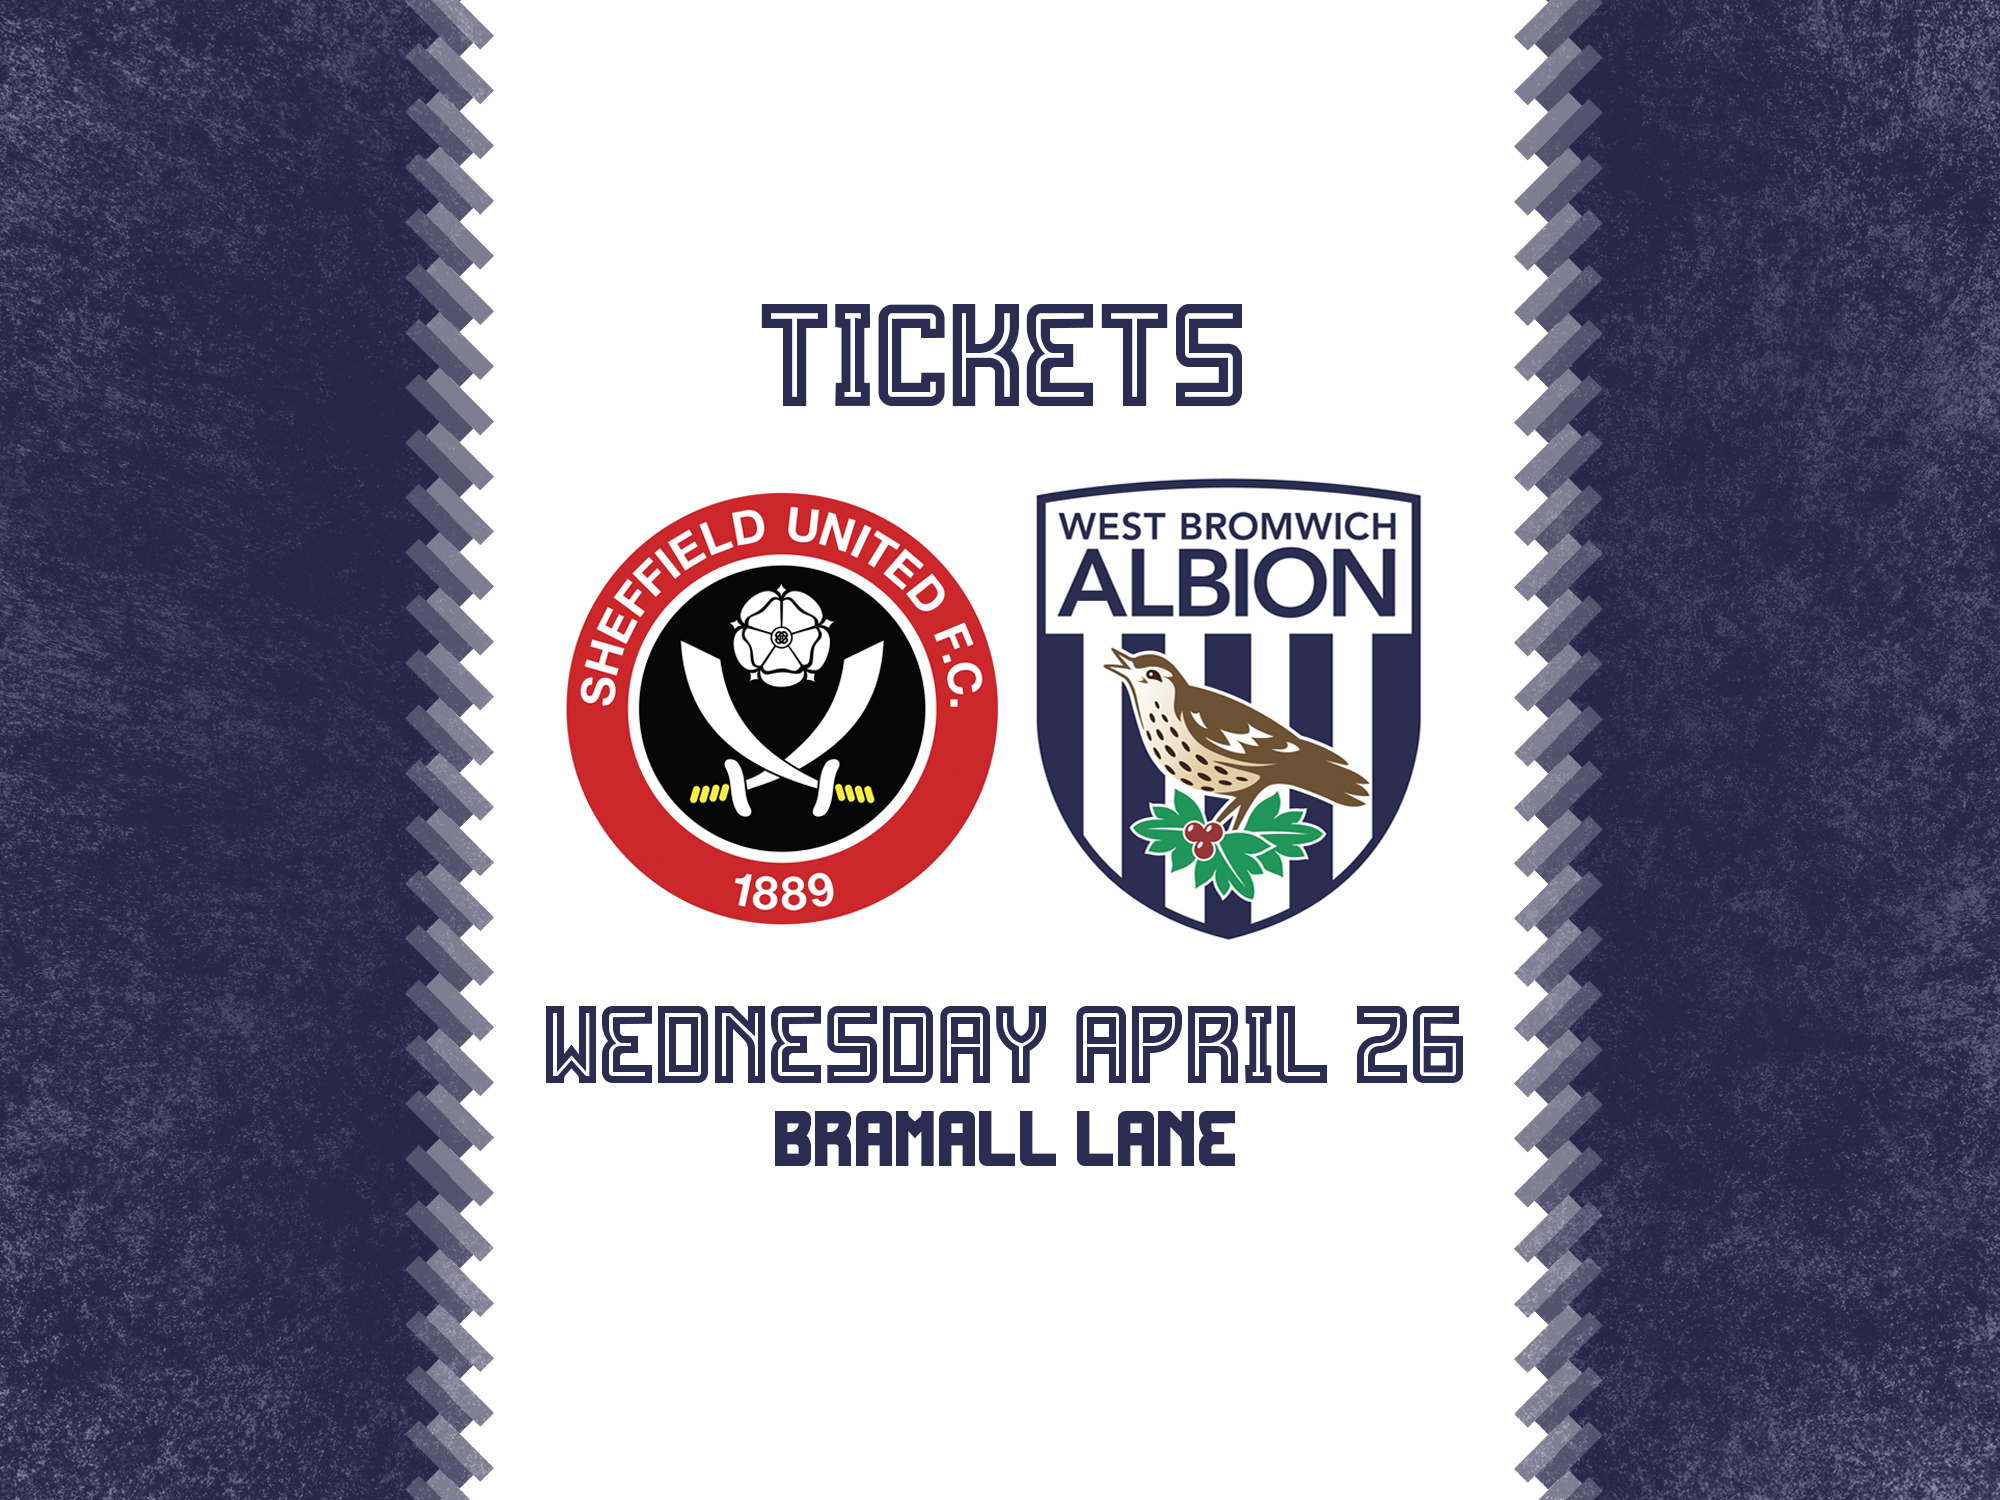 A ticket graphic for Albion's trip to Sheffield United